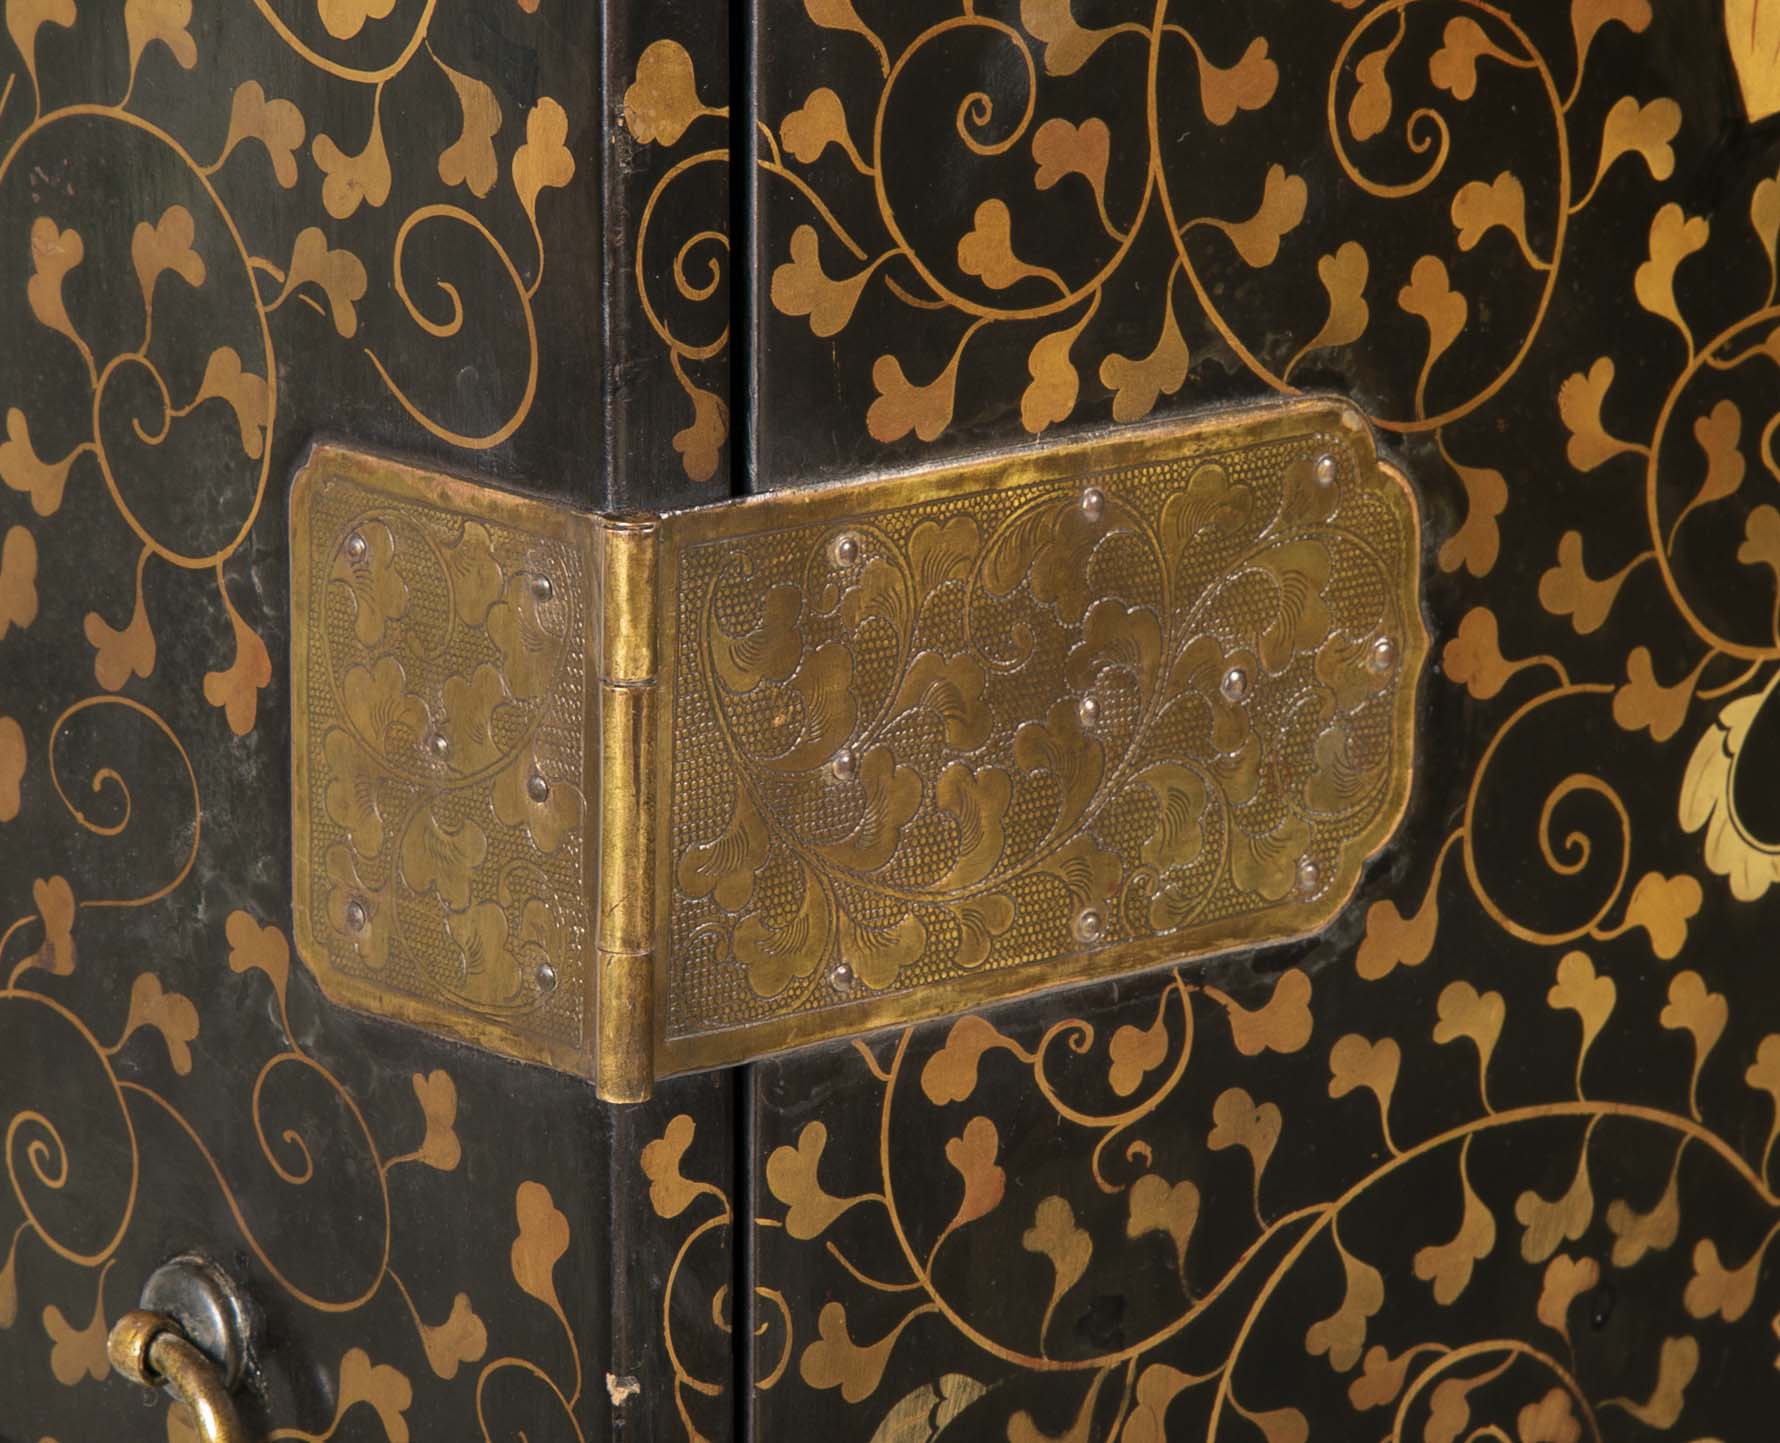 A Large Japanese Black and Gold Lacquered Cabinet on Stand with Gilt Mounts